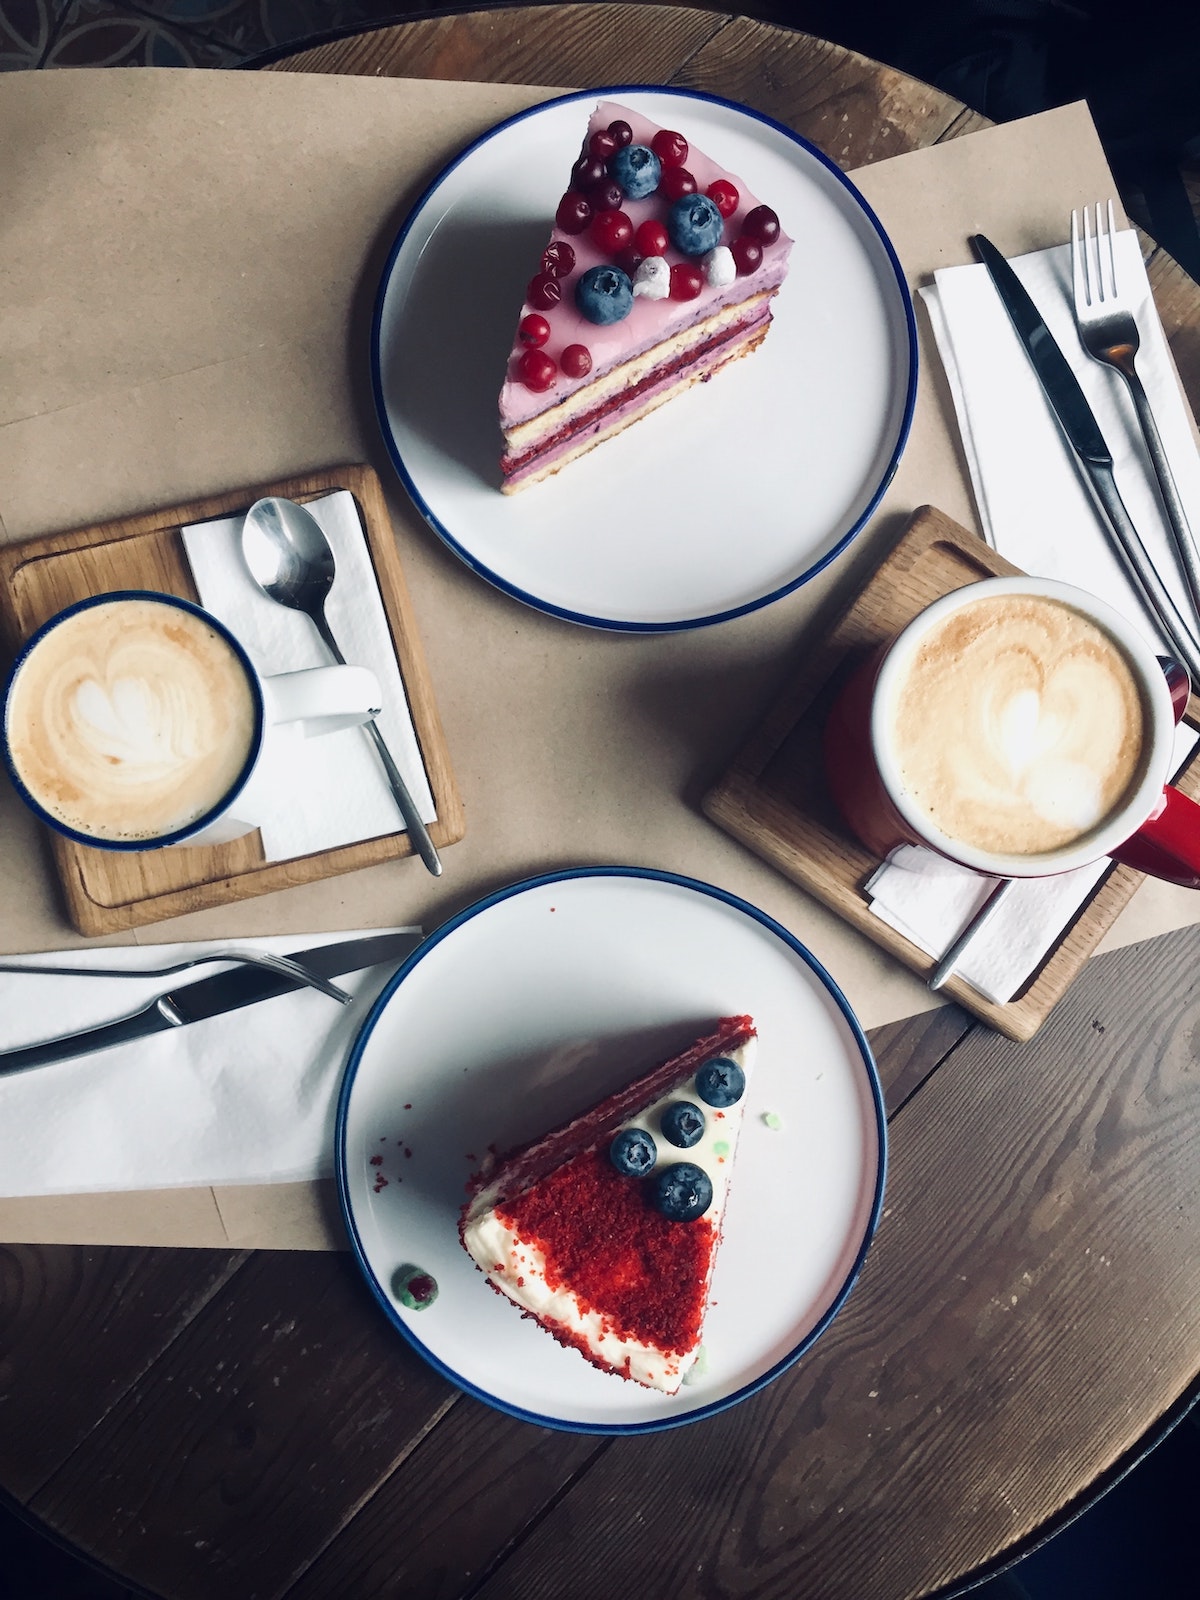 Overhead shot of two slices of cake with berries on white plates and two lattes.